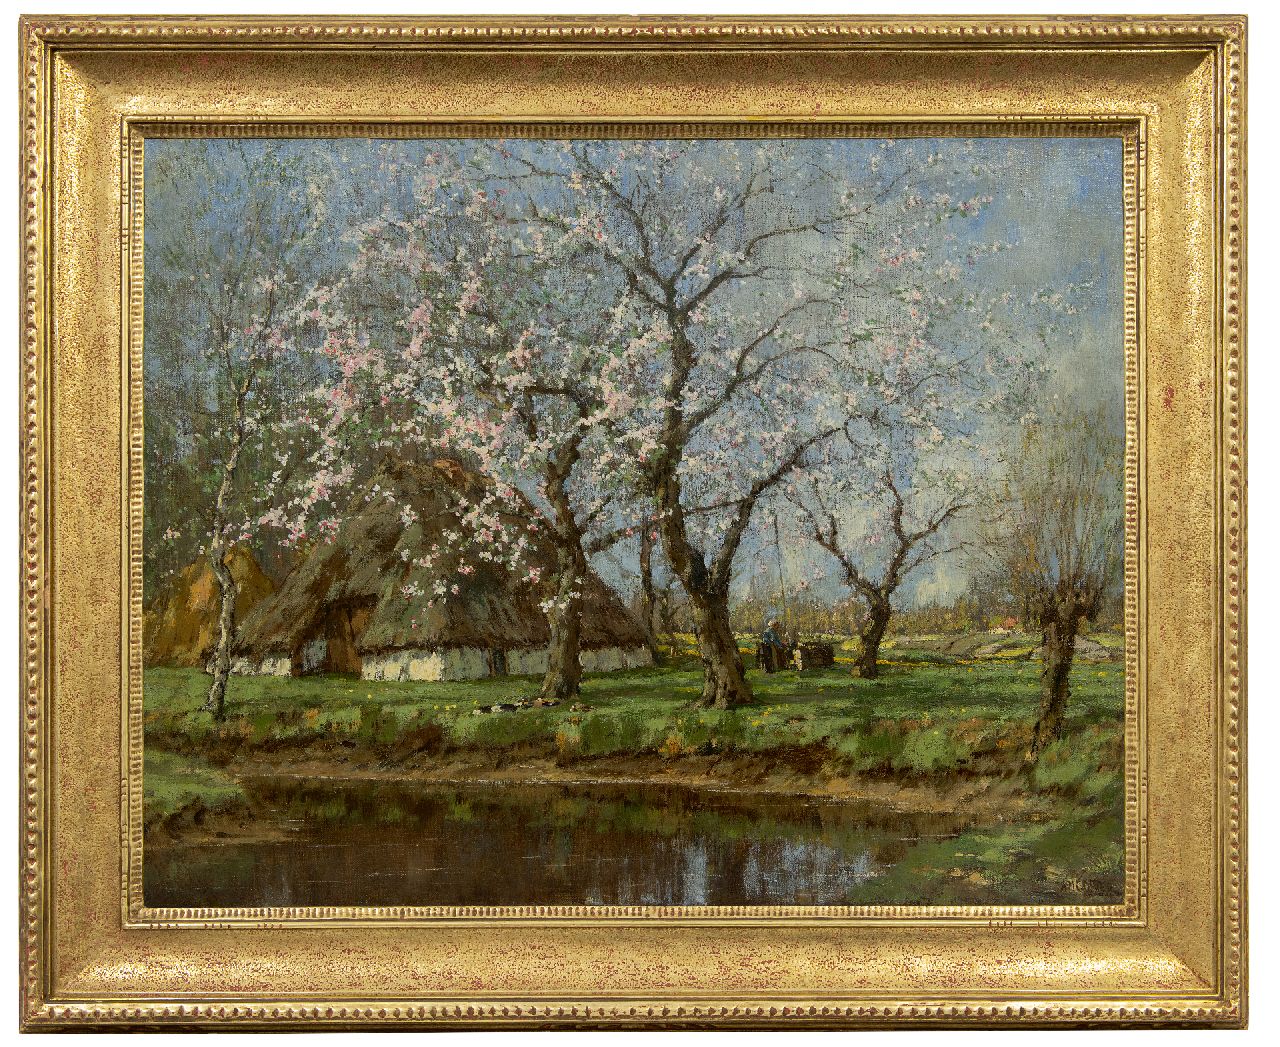 Gorter A.M.  | 'Arnold' Marc Gorter | Paintings offered for sale | Spring landscape with a farm, oil on canvas 62.6 x 79.4 cm, signed l.r.